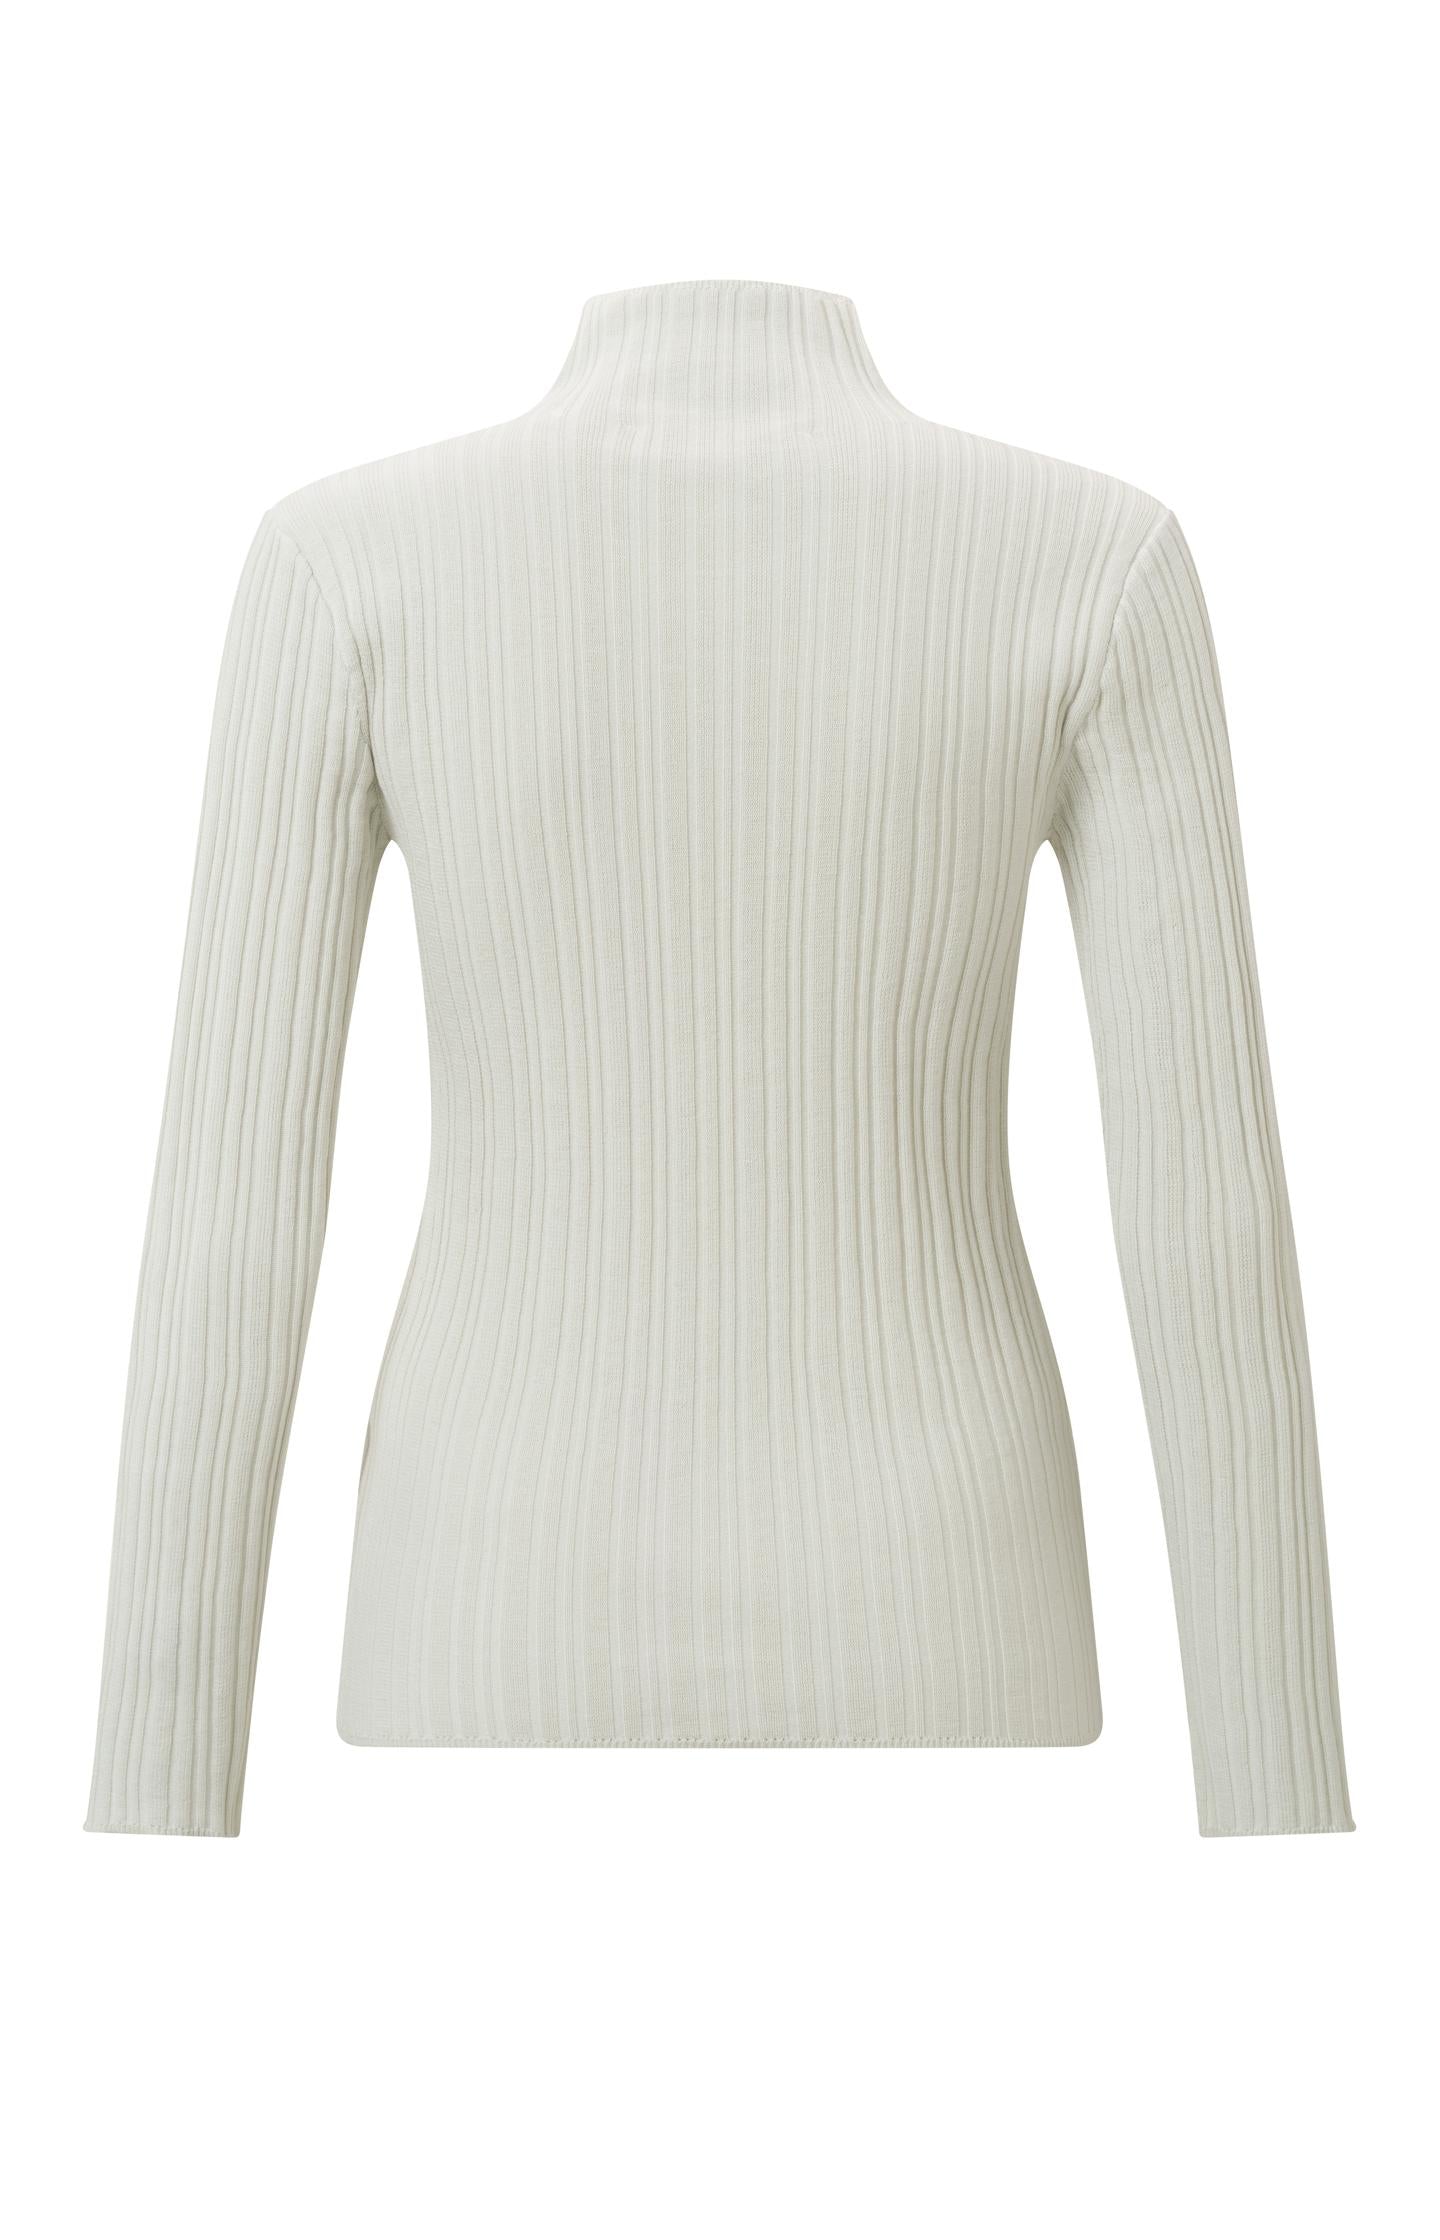 Ribbed sweater with high neck, long sleeves and zipper